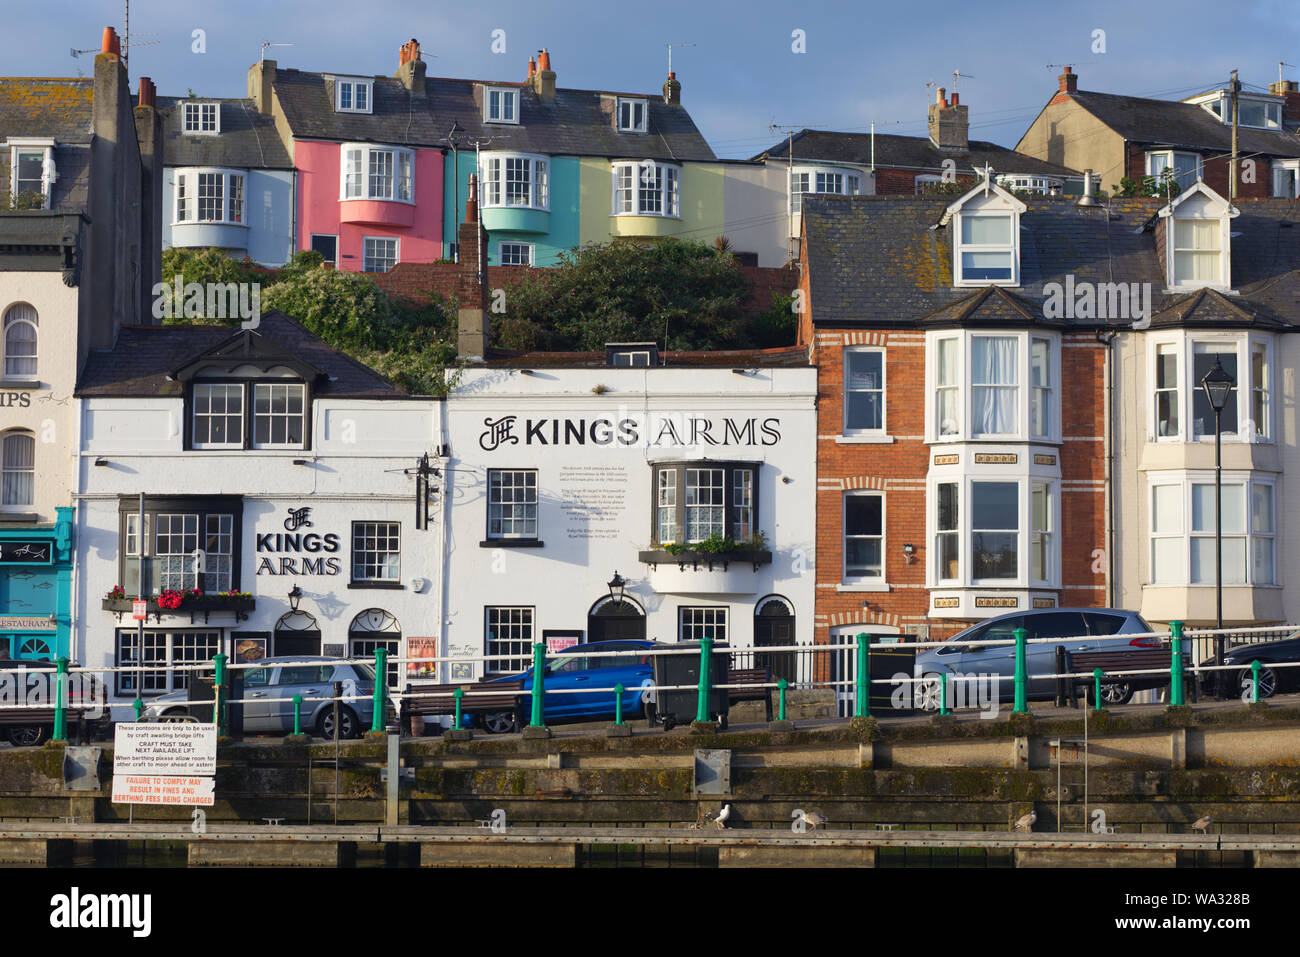 Le Kings Arms Weymouth, Dorset Banque D'Images